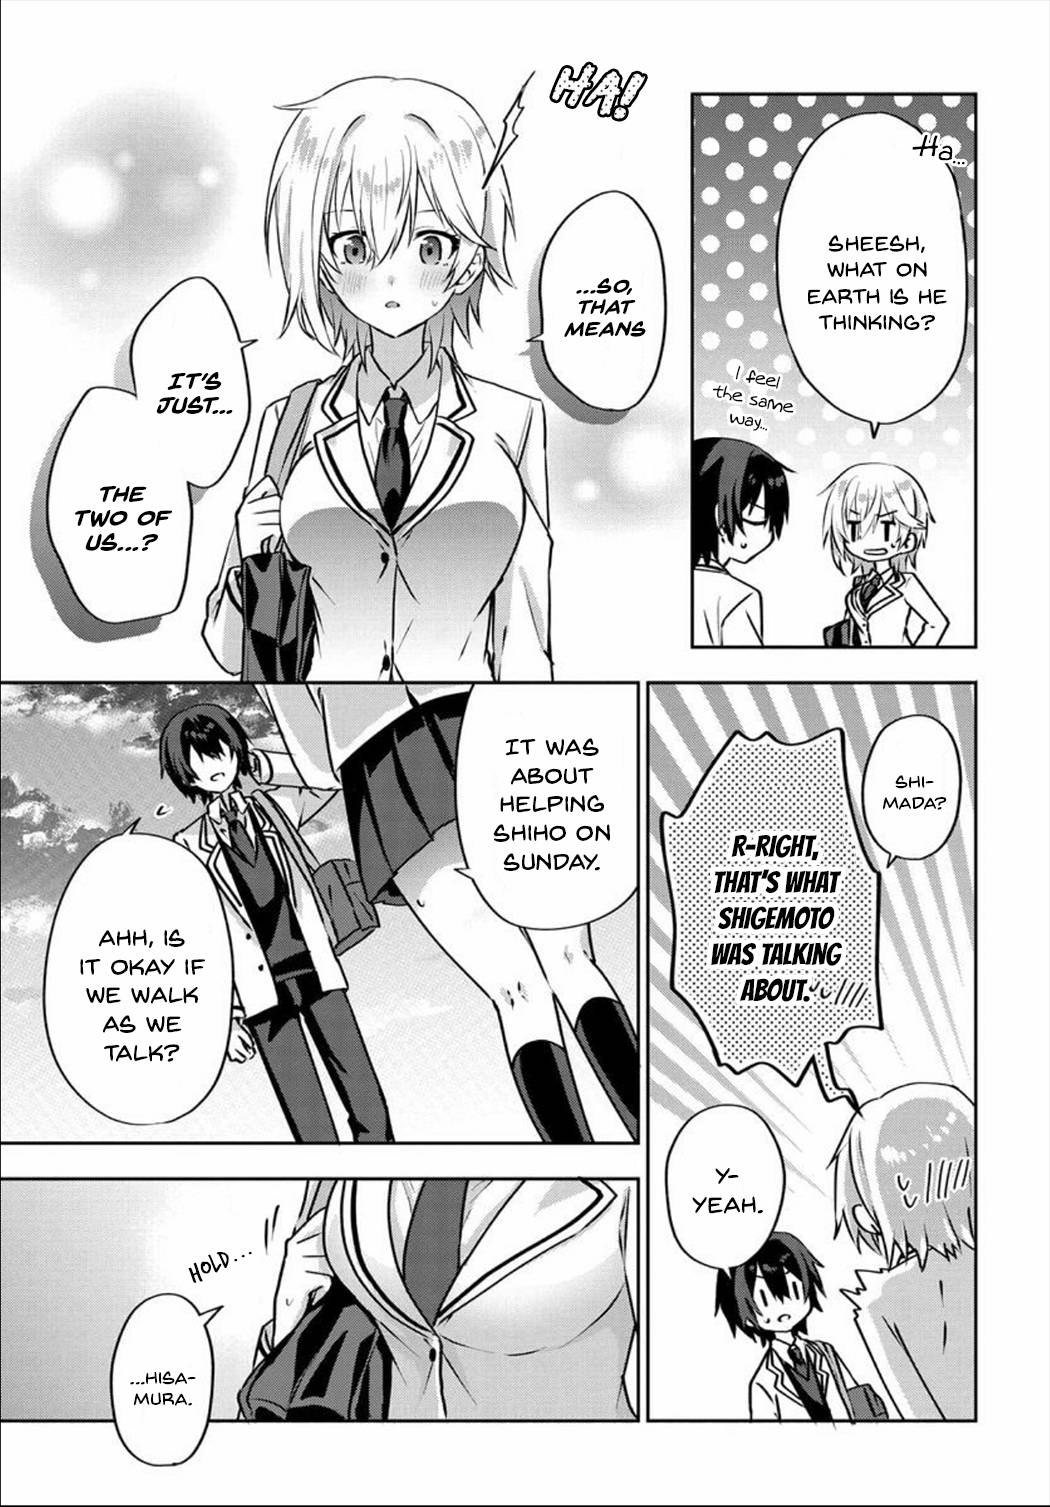 Since I’Ve Entered The World Of Romantic Comedy Manga, I’Ll Do My Best To Make The Losing Heroine Happy - chapter 3.5 - #5